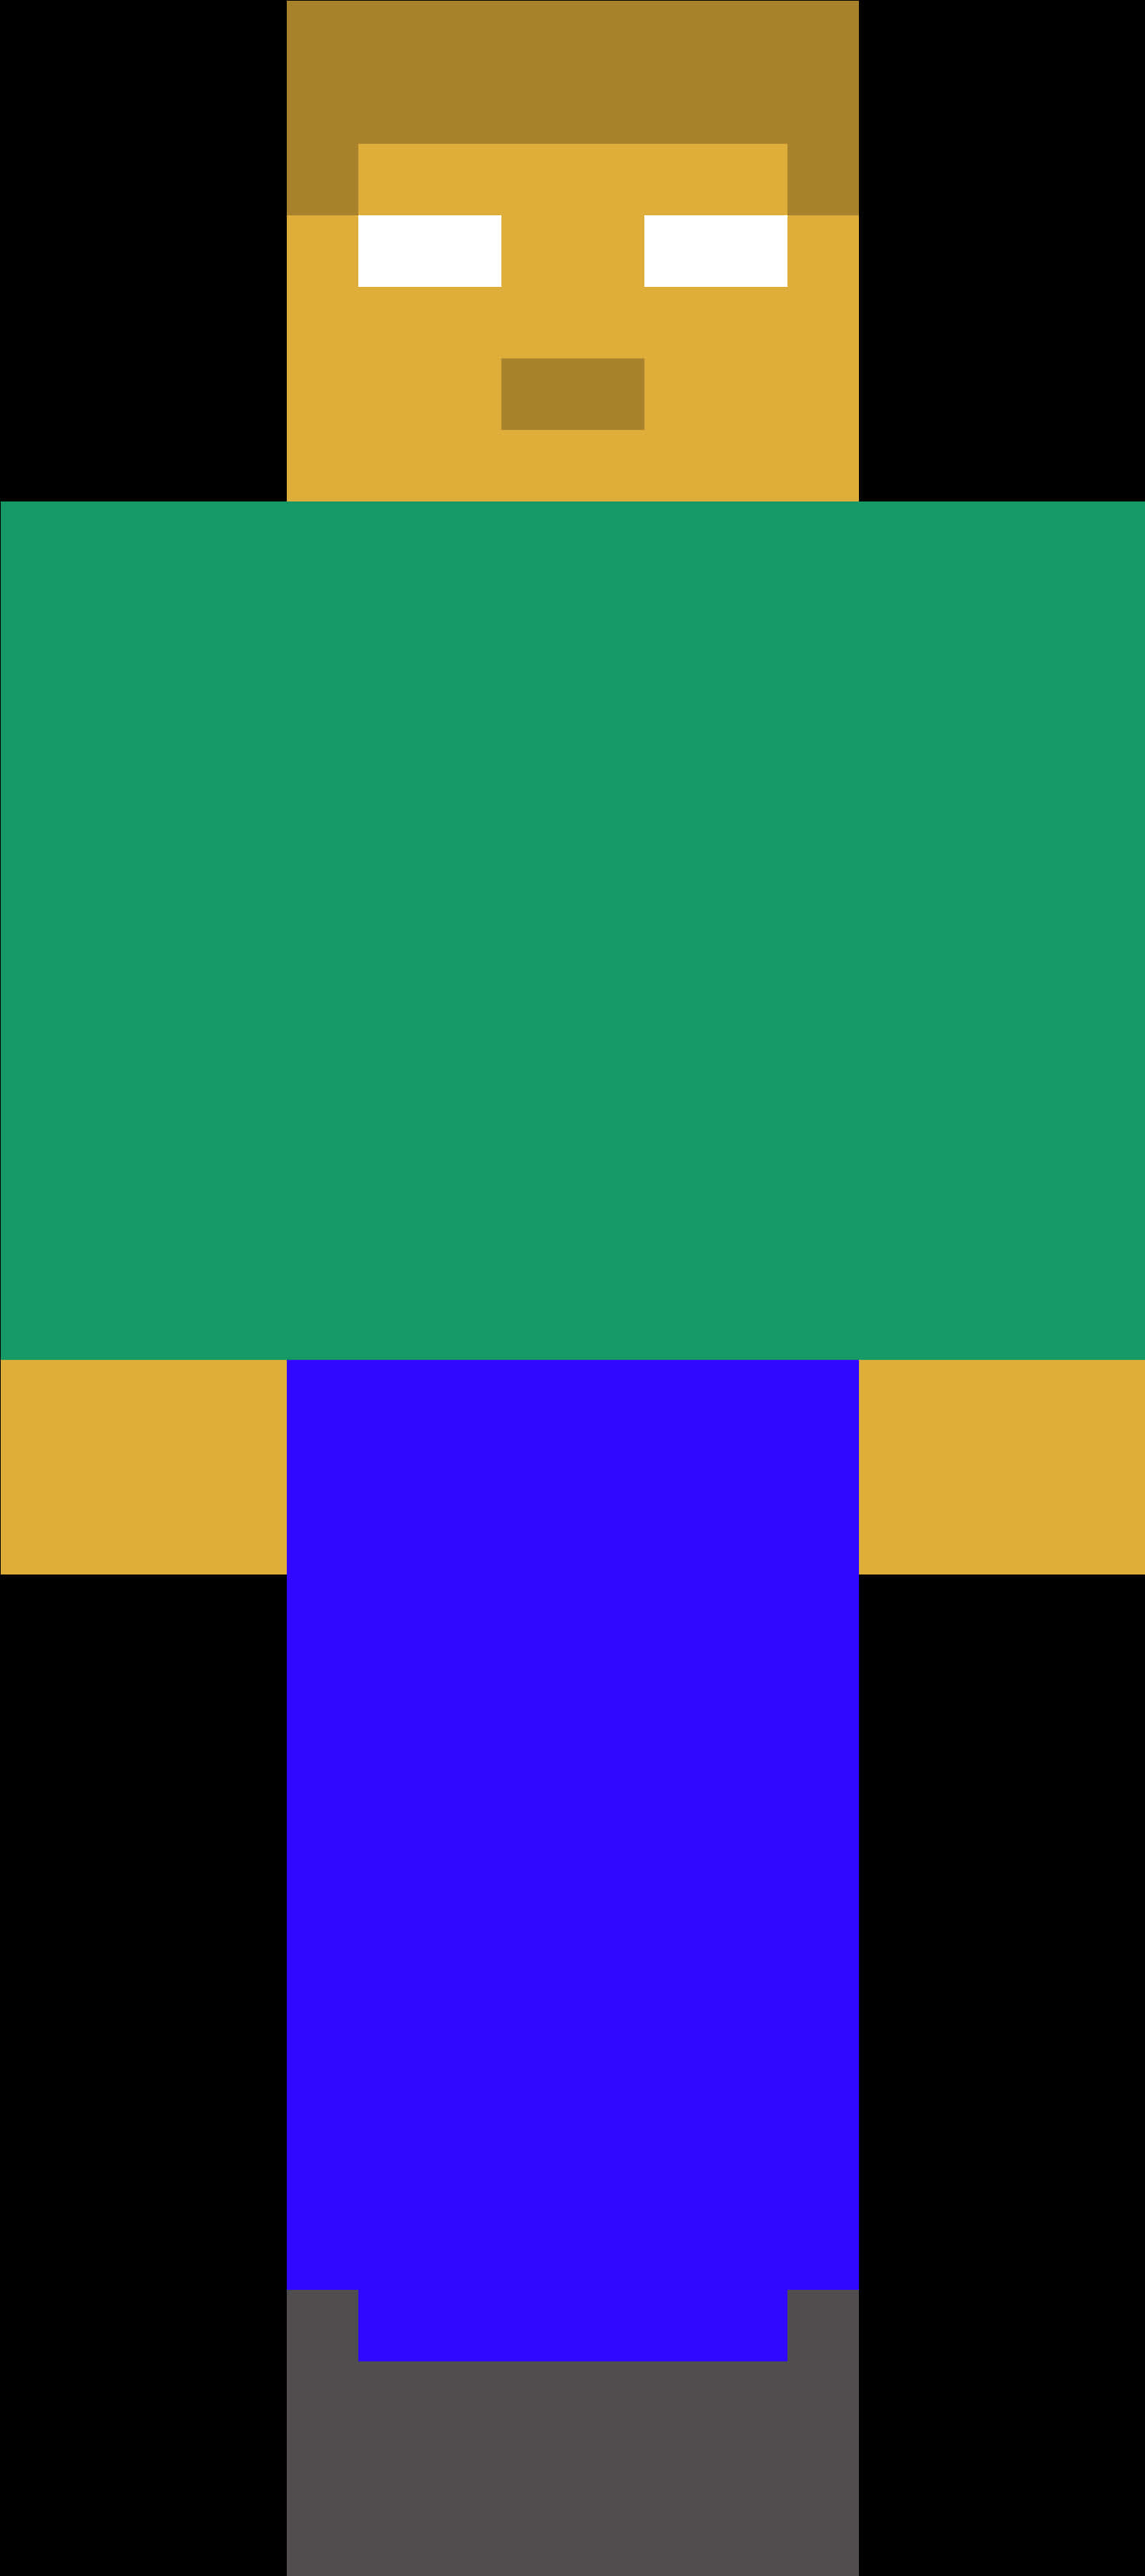 A Colorful Square With Black Yellow And Blue Squares